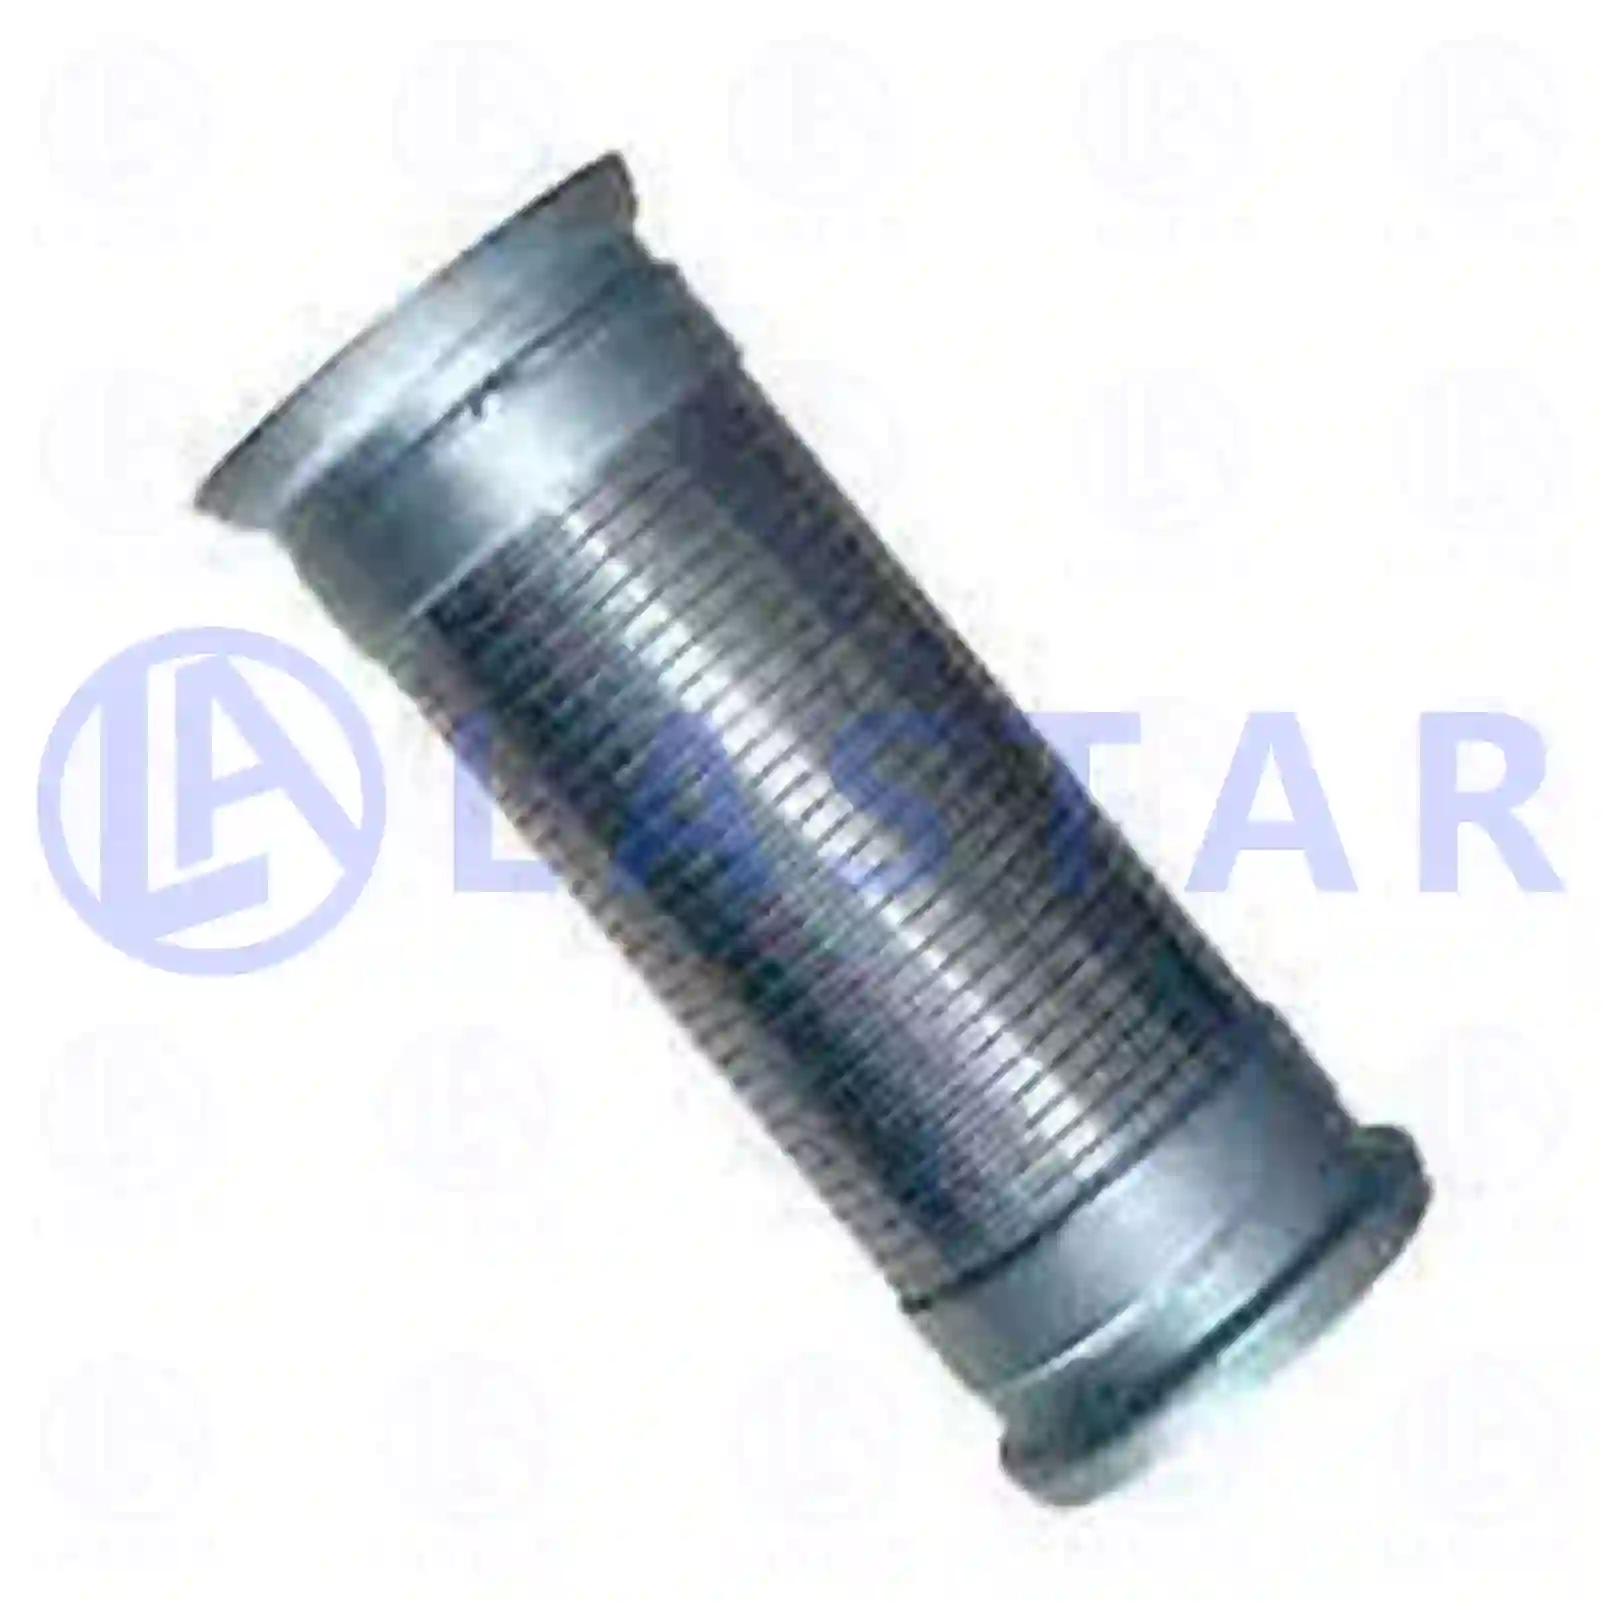 Flexible pipe, stainless steel, 77706284, N1011006858, 6214900065, 8341000254, 011006858, 022151000, 8341000150C, ZG10325-0008 ||  77706284 Lastar Spare Part | Truck Spare Parts, Auotomotive Spare Parts Flexible pipe, stainless steel, 77706284, N1011006858, 6214900065, 8341000254, 011006858, 022151000, 8341000150C, ZG10325-0008 ||  77706284 Lastar Spare Part | Truck Spare Parts, Auotomotive Spare Parts